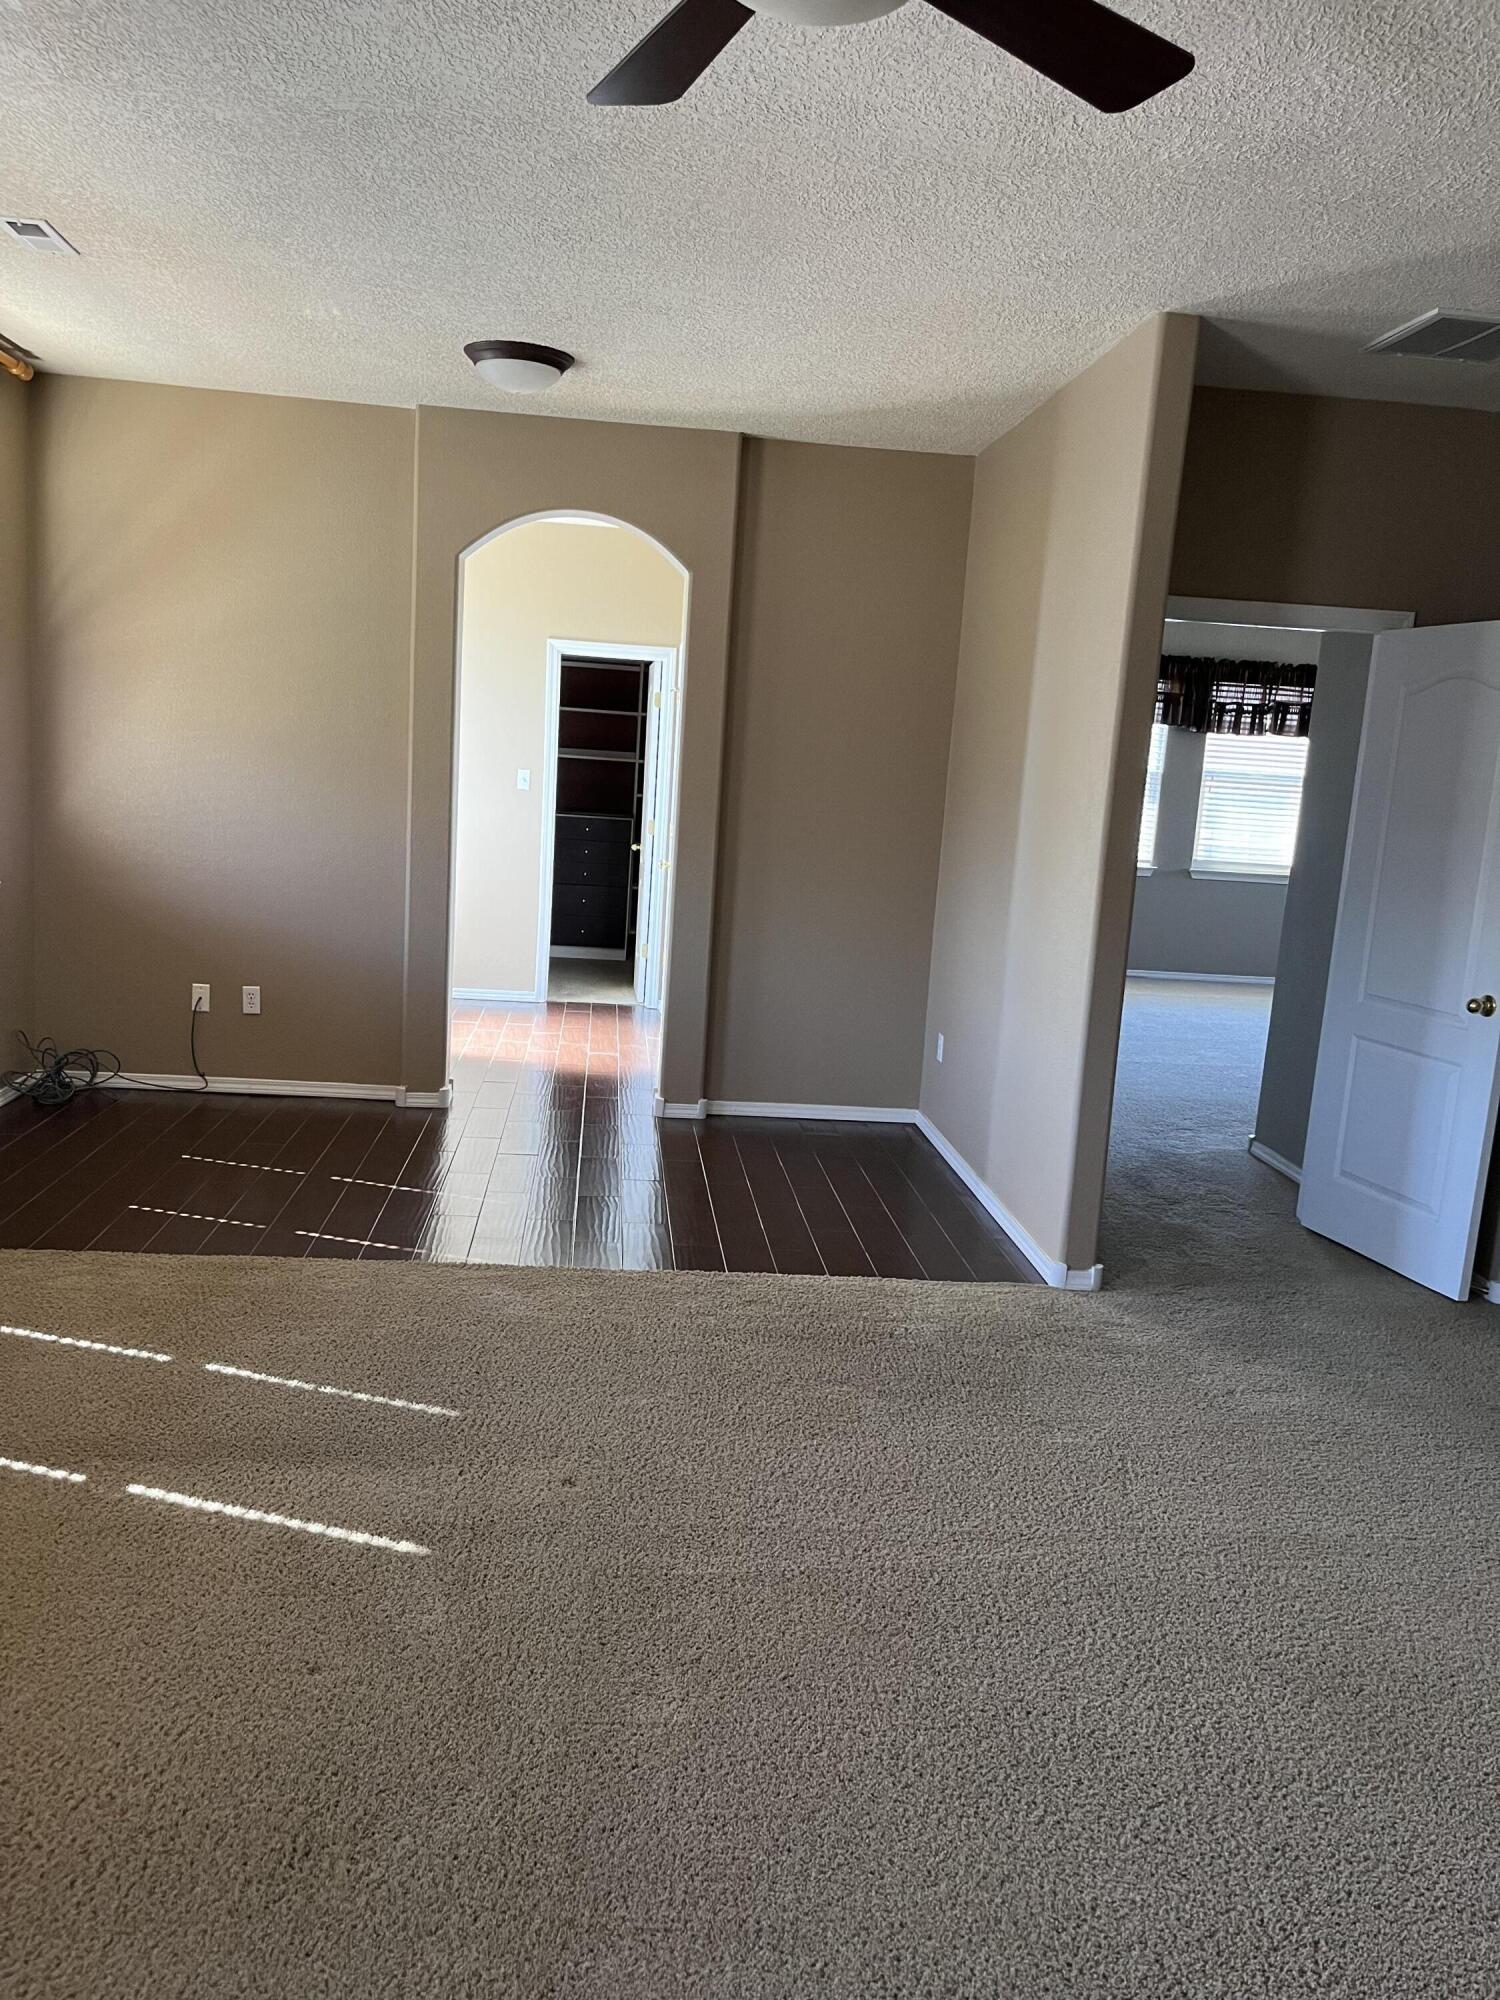 1722 Agua Dulce Drive SE, Rio Rancho, New Mexico 87124, 5 Bedrooms Bedrooms, ,3 BathroomsBathrooms,Residential,For Sale,1722 Agua Dulce Drive SE,1061214